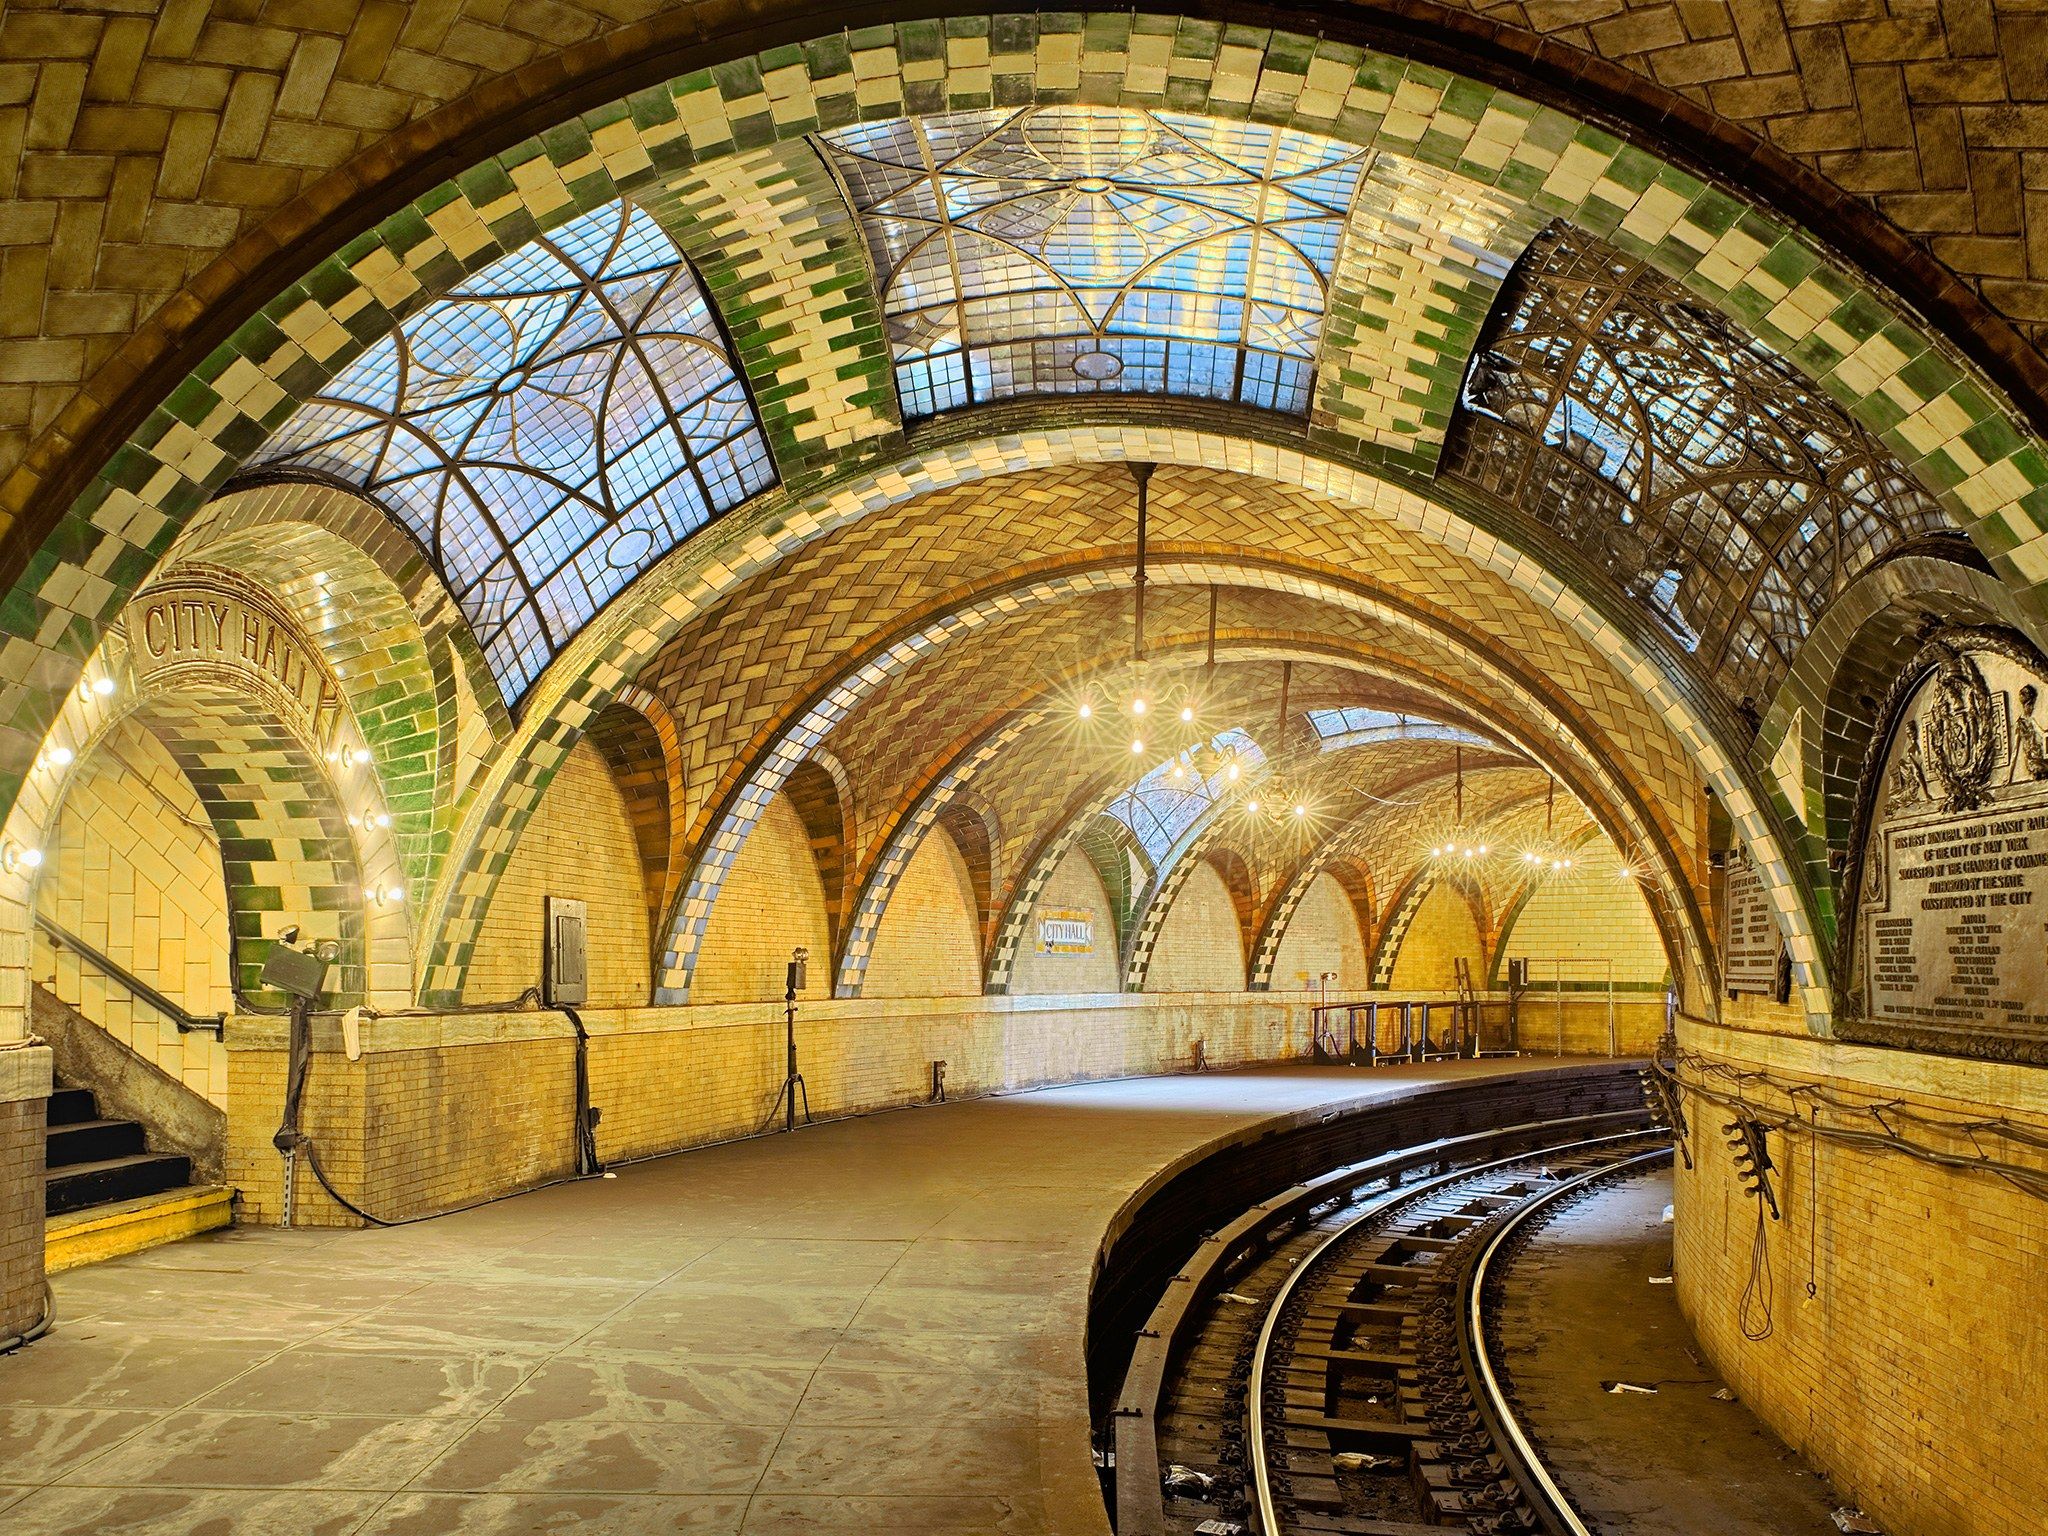 Abandoned City Hall Subway in NY as part of urban exploration blogs featuring forgotten city gems